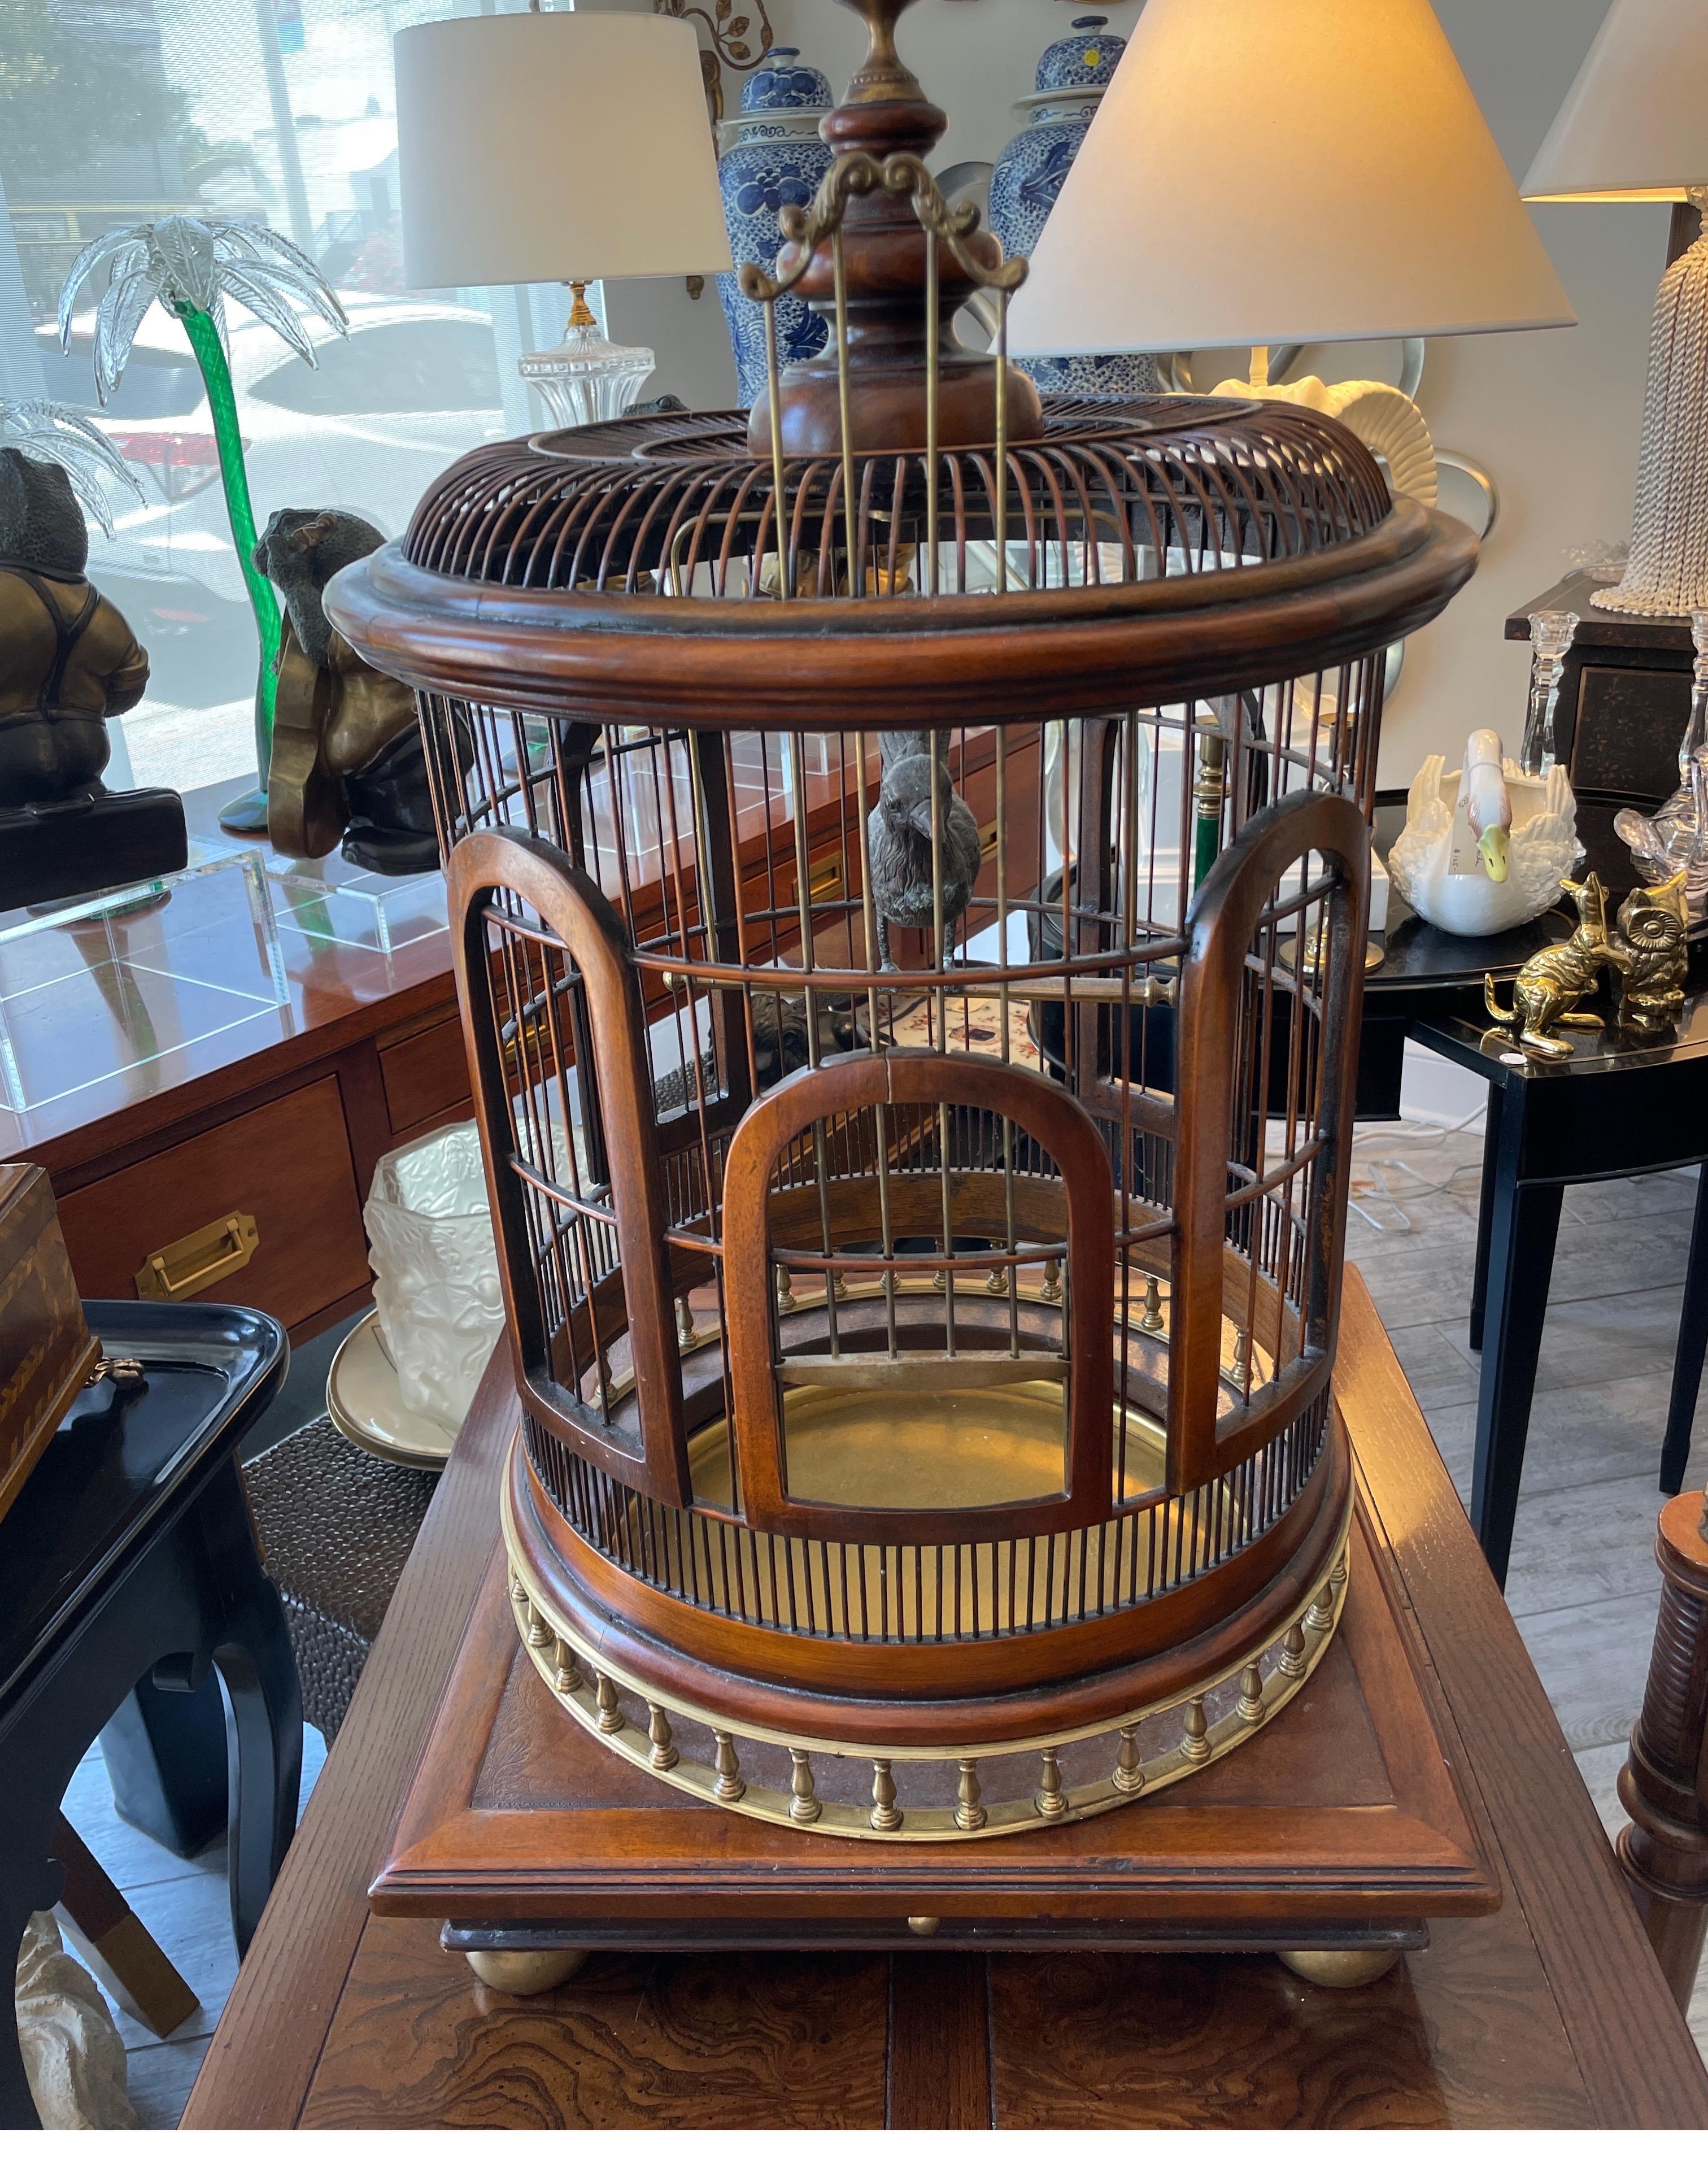 Vintage wood and brass bird cage. This cage is functional. The door raises up & down. The bottom brass tray pulls out for cleaning. It comes with a brass bird on a perch in the center. The outside is topped with a large brass acorn. A very striking